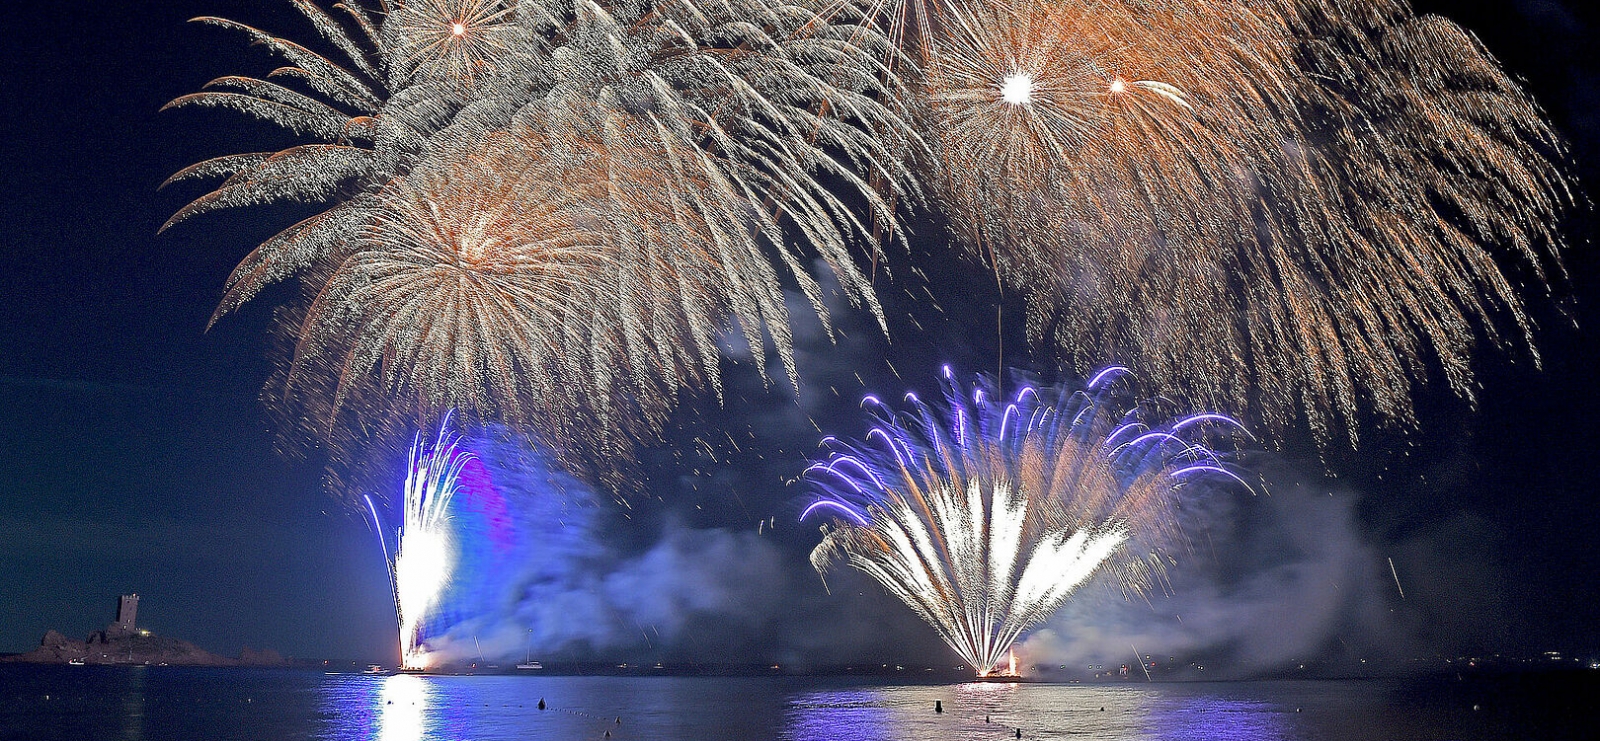 Fireworks on 16th August